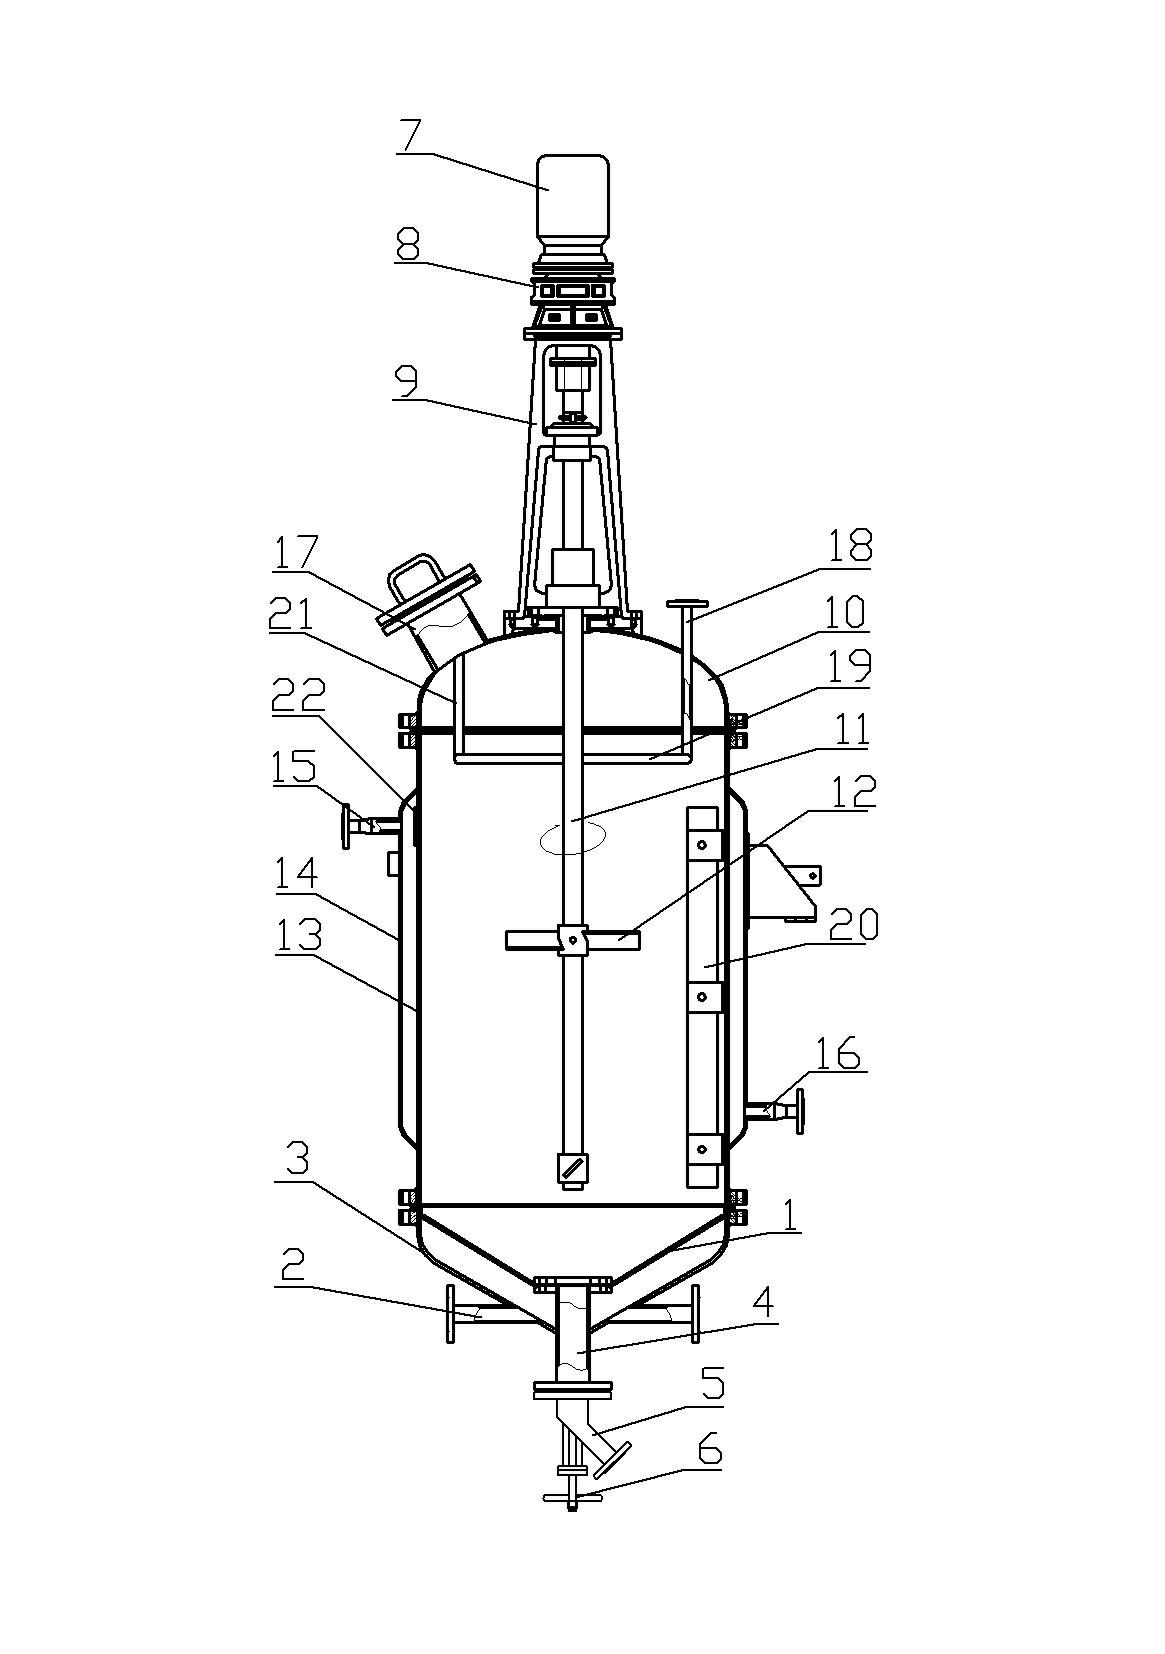 Improved discharge port structure of washing kettle